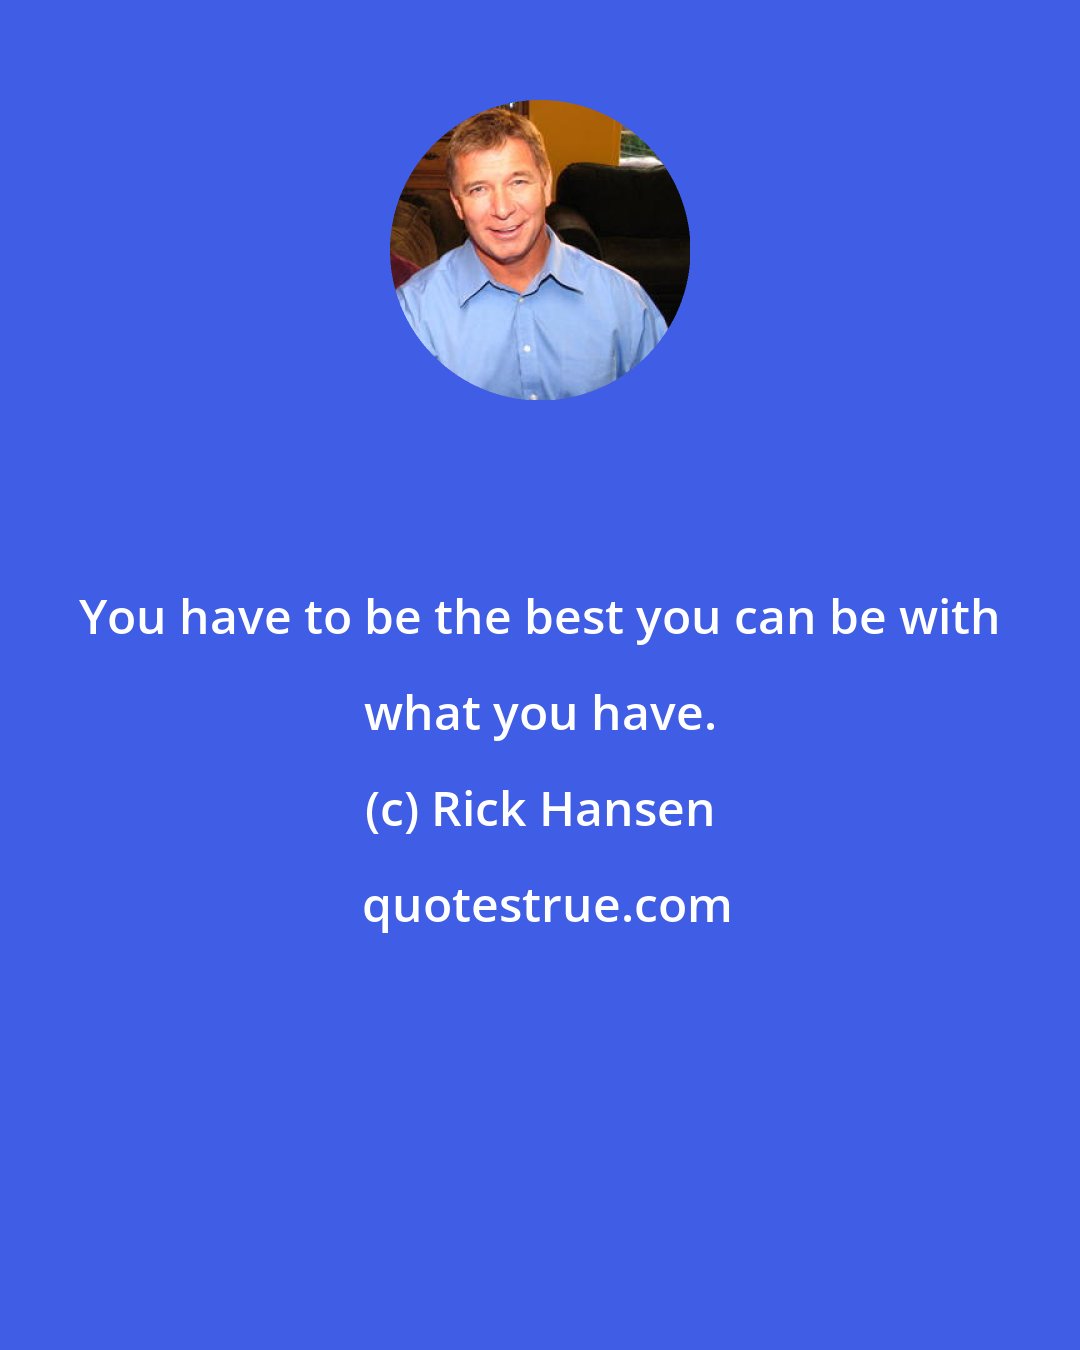 Rick Hansen: You have to be the best you can be with what you have.